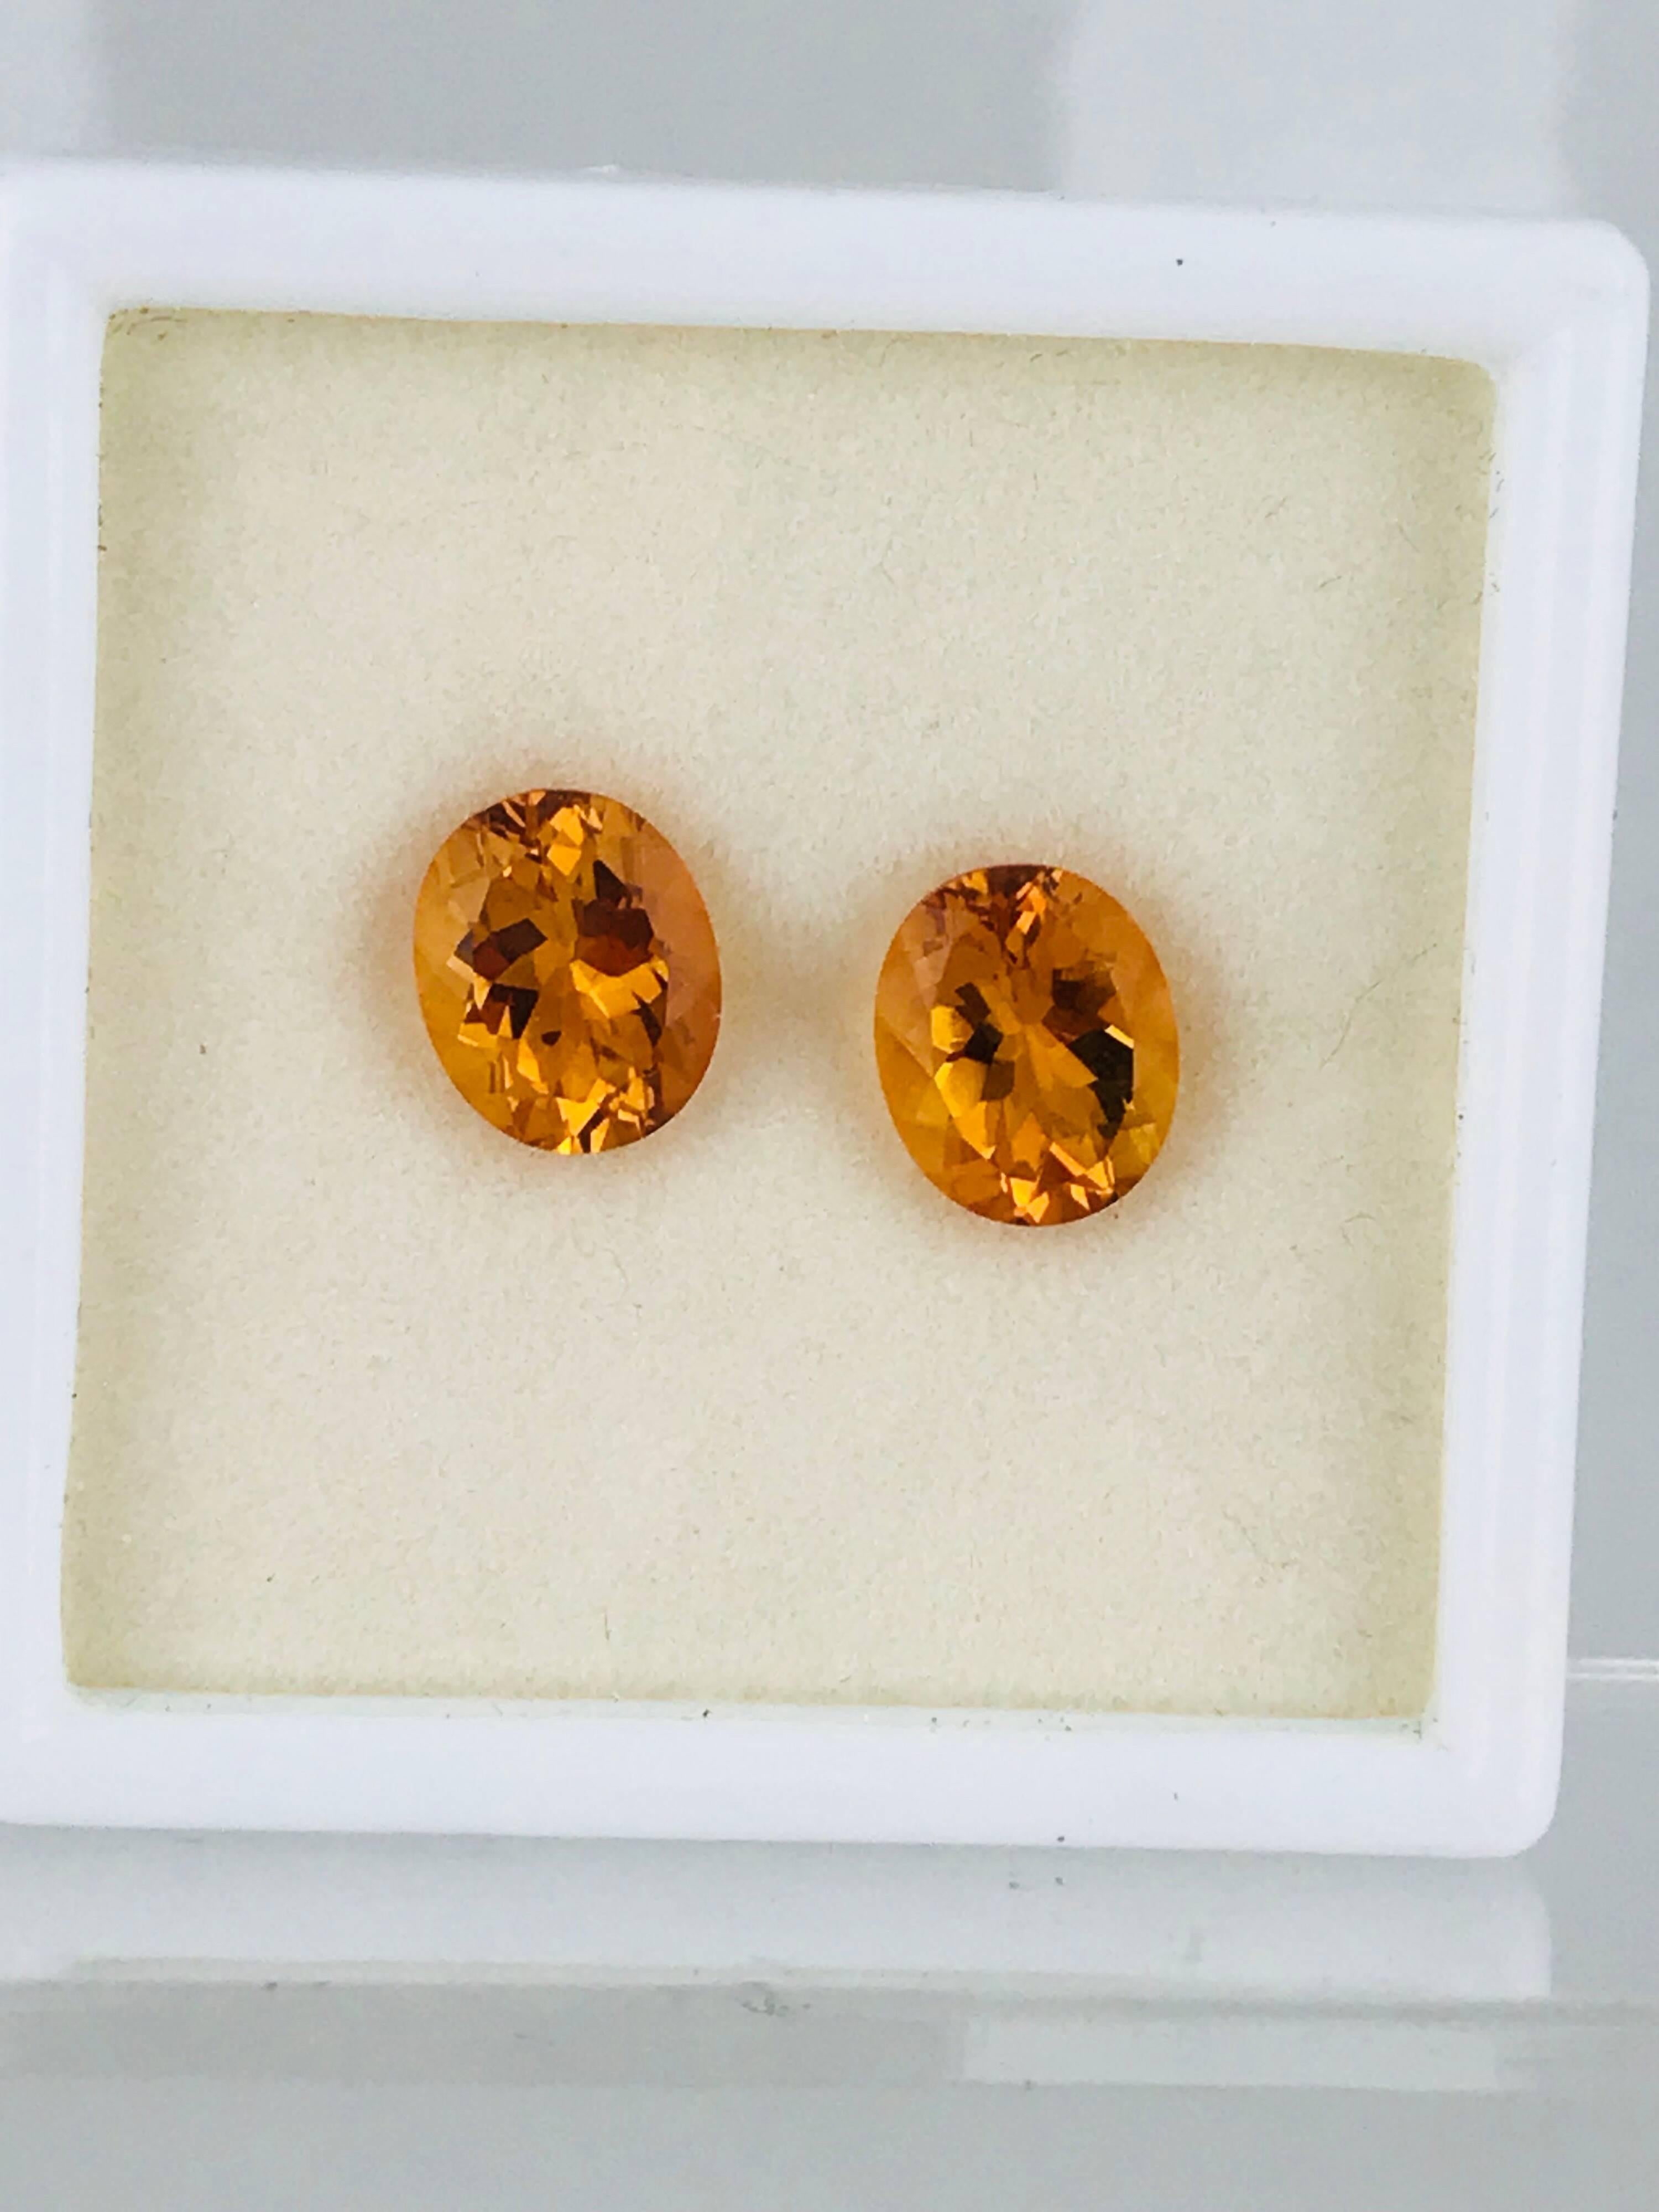 Set of matching oval 3.10 carat total weight Citrine. Vibrant colored, brilliant oval cuts. 
The stones measure 11 x 9 x 6 millimeters for easy resetting designs.

GIA Gemologist inspected and evaluated